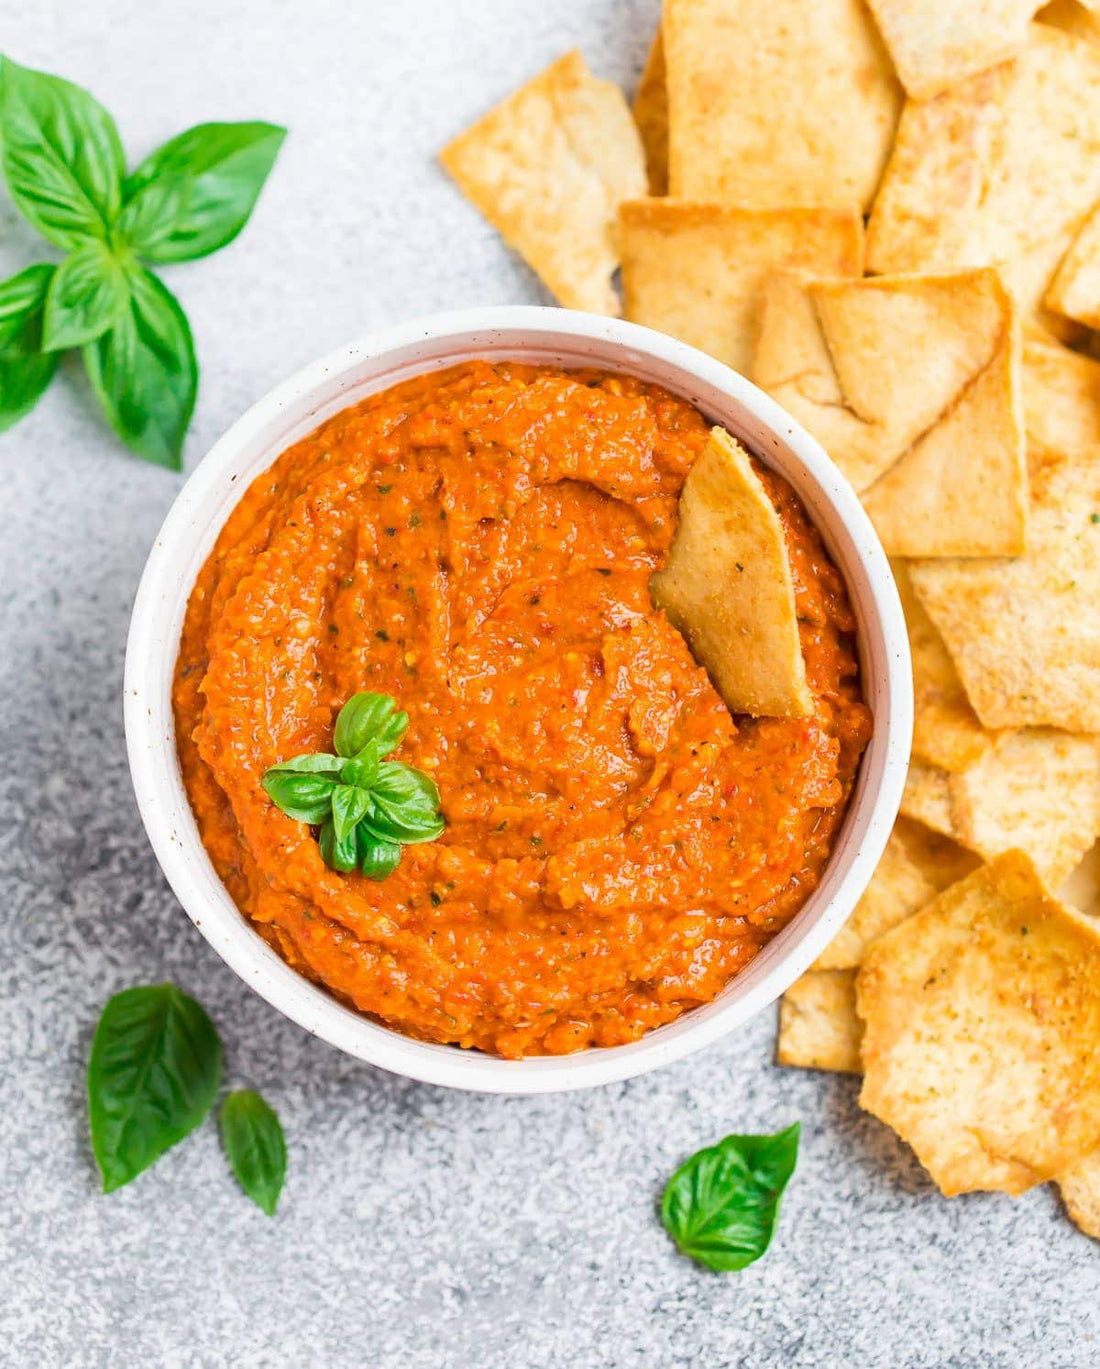 New Orleans Roasted Red Pepper Dip